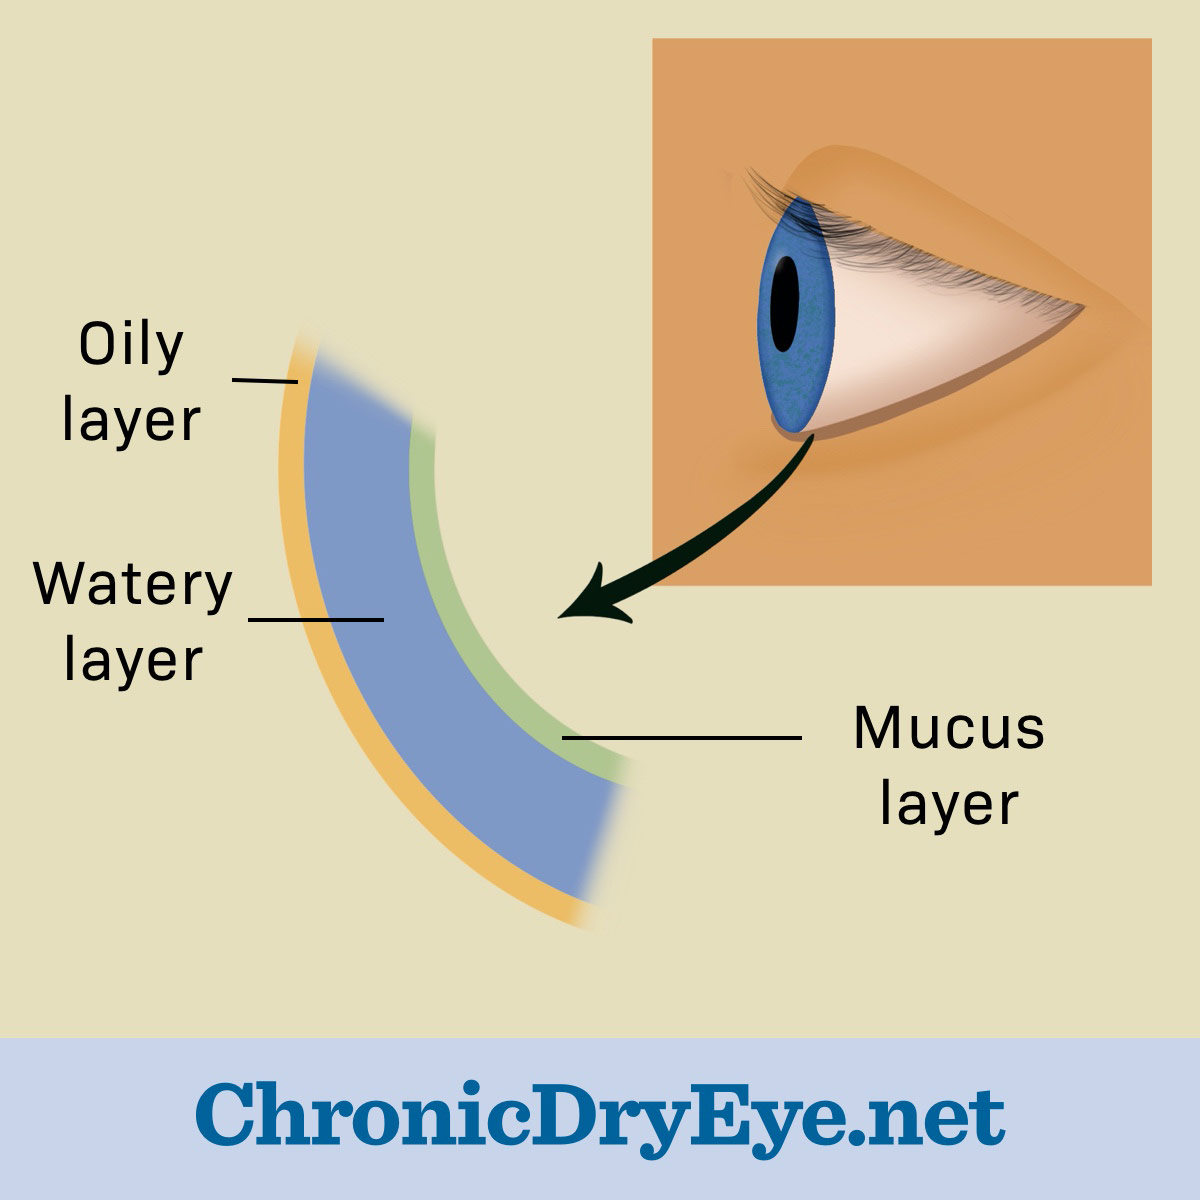 Oily watery and mucus layers of the tear film